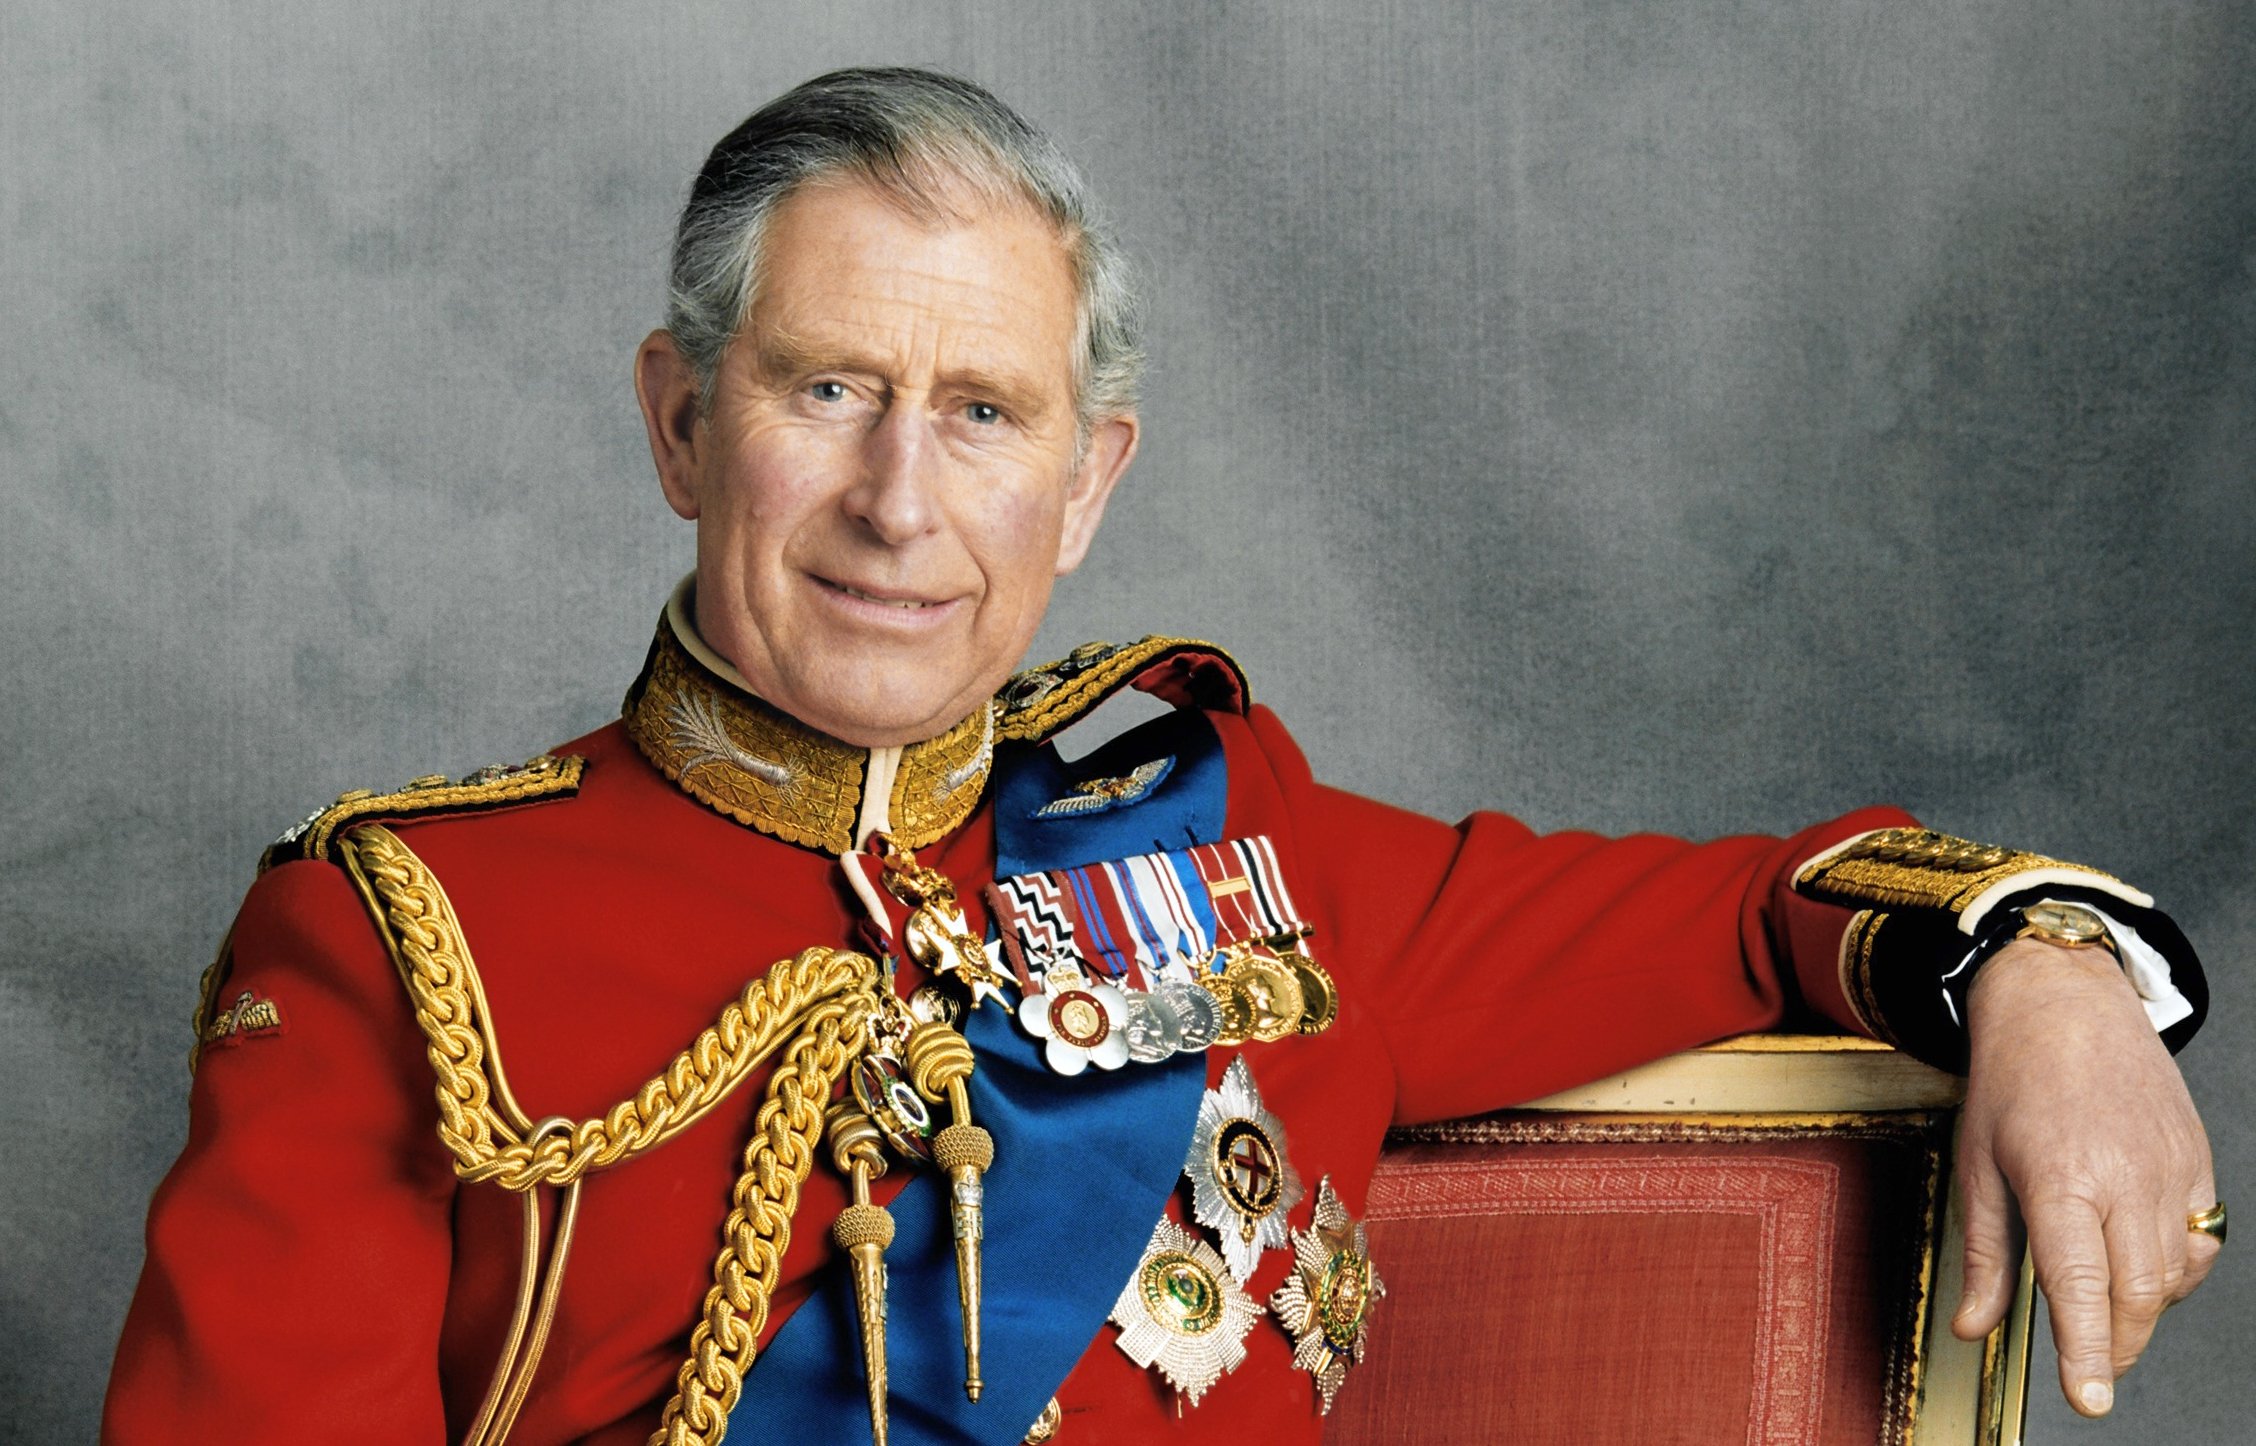 King Charles poses for an official portrait to mark his 60th birthday, a photo taken on November 13, 2008, in London, England. | Source: Getty Images